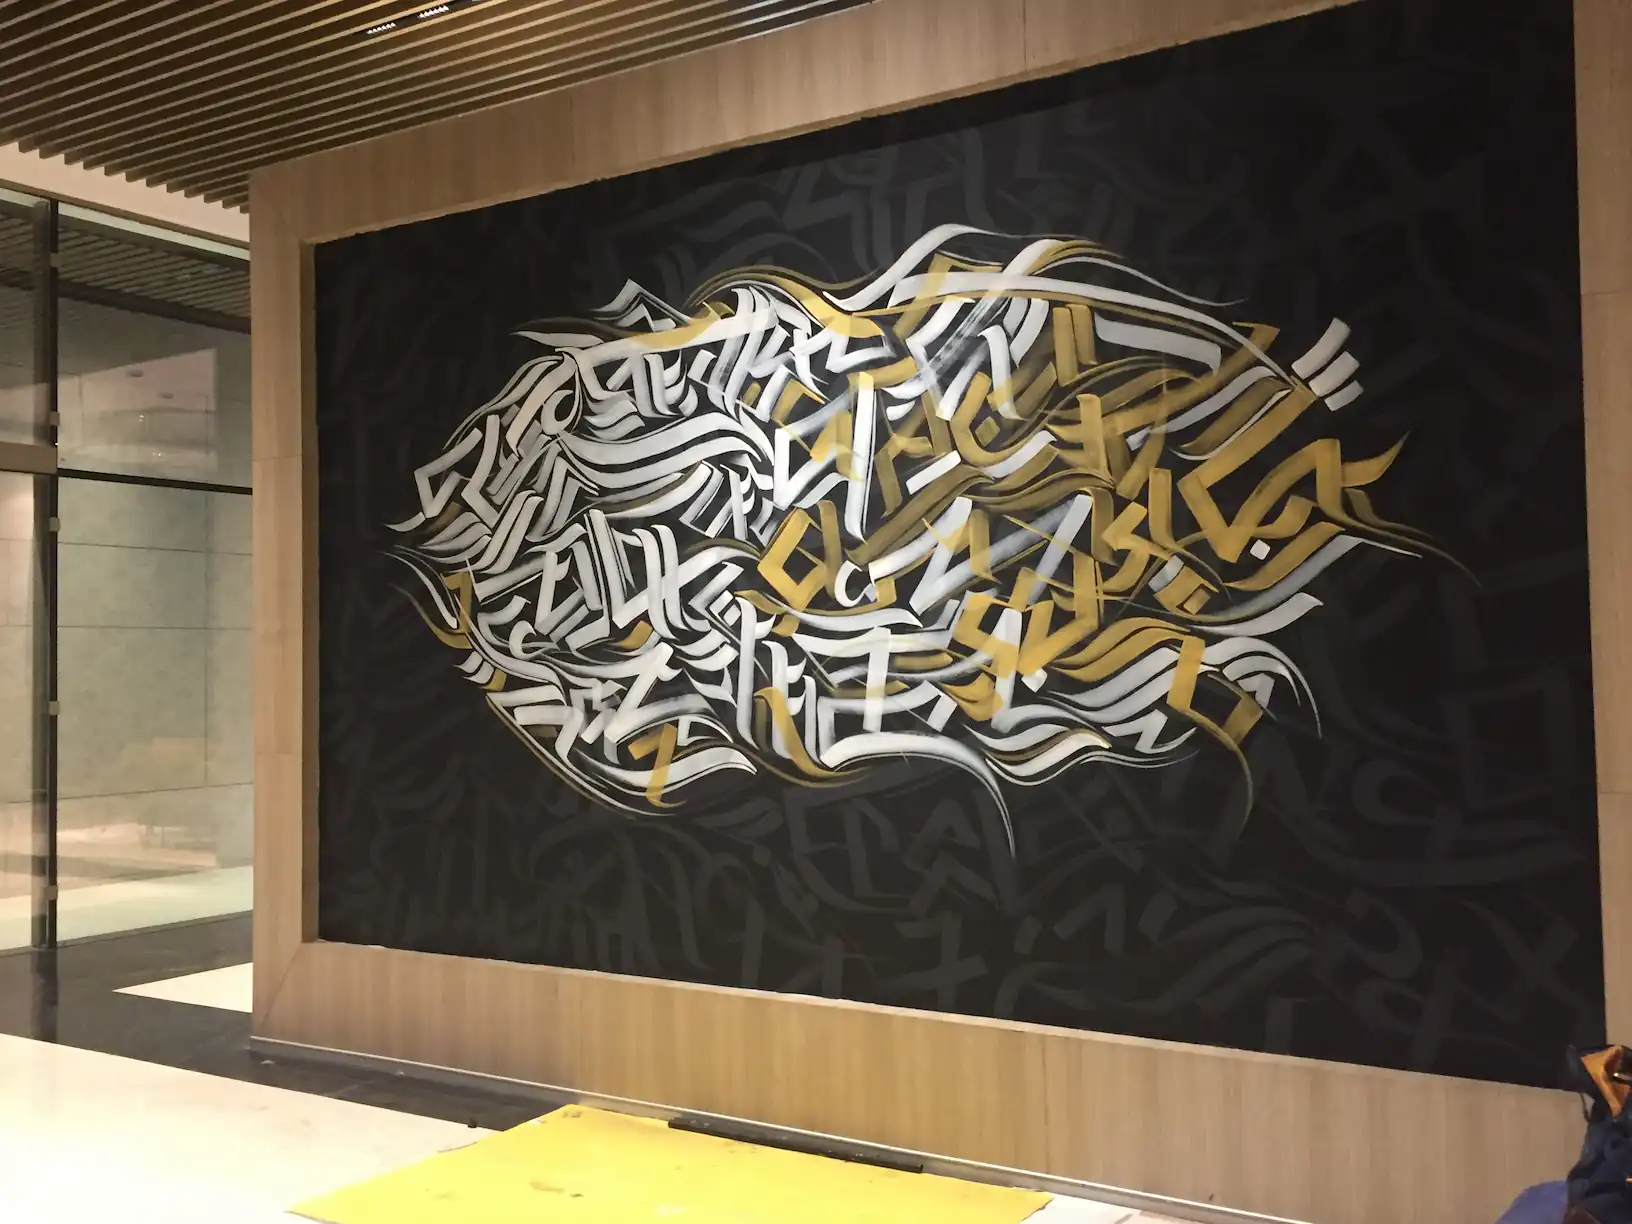 amazing calligraffiti art done by wicked broz for advant 3